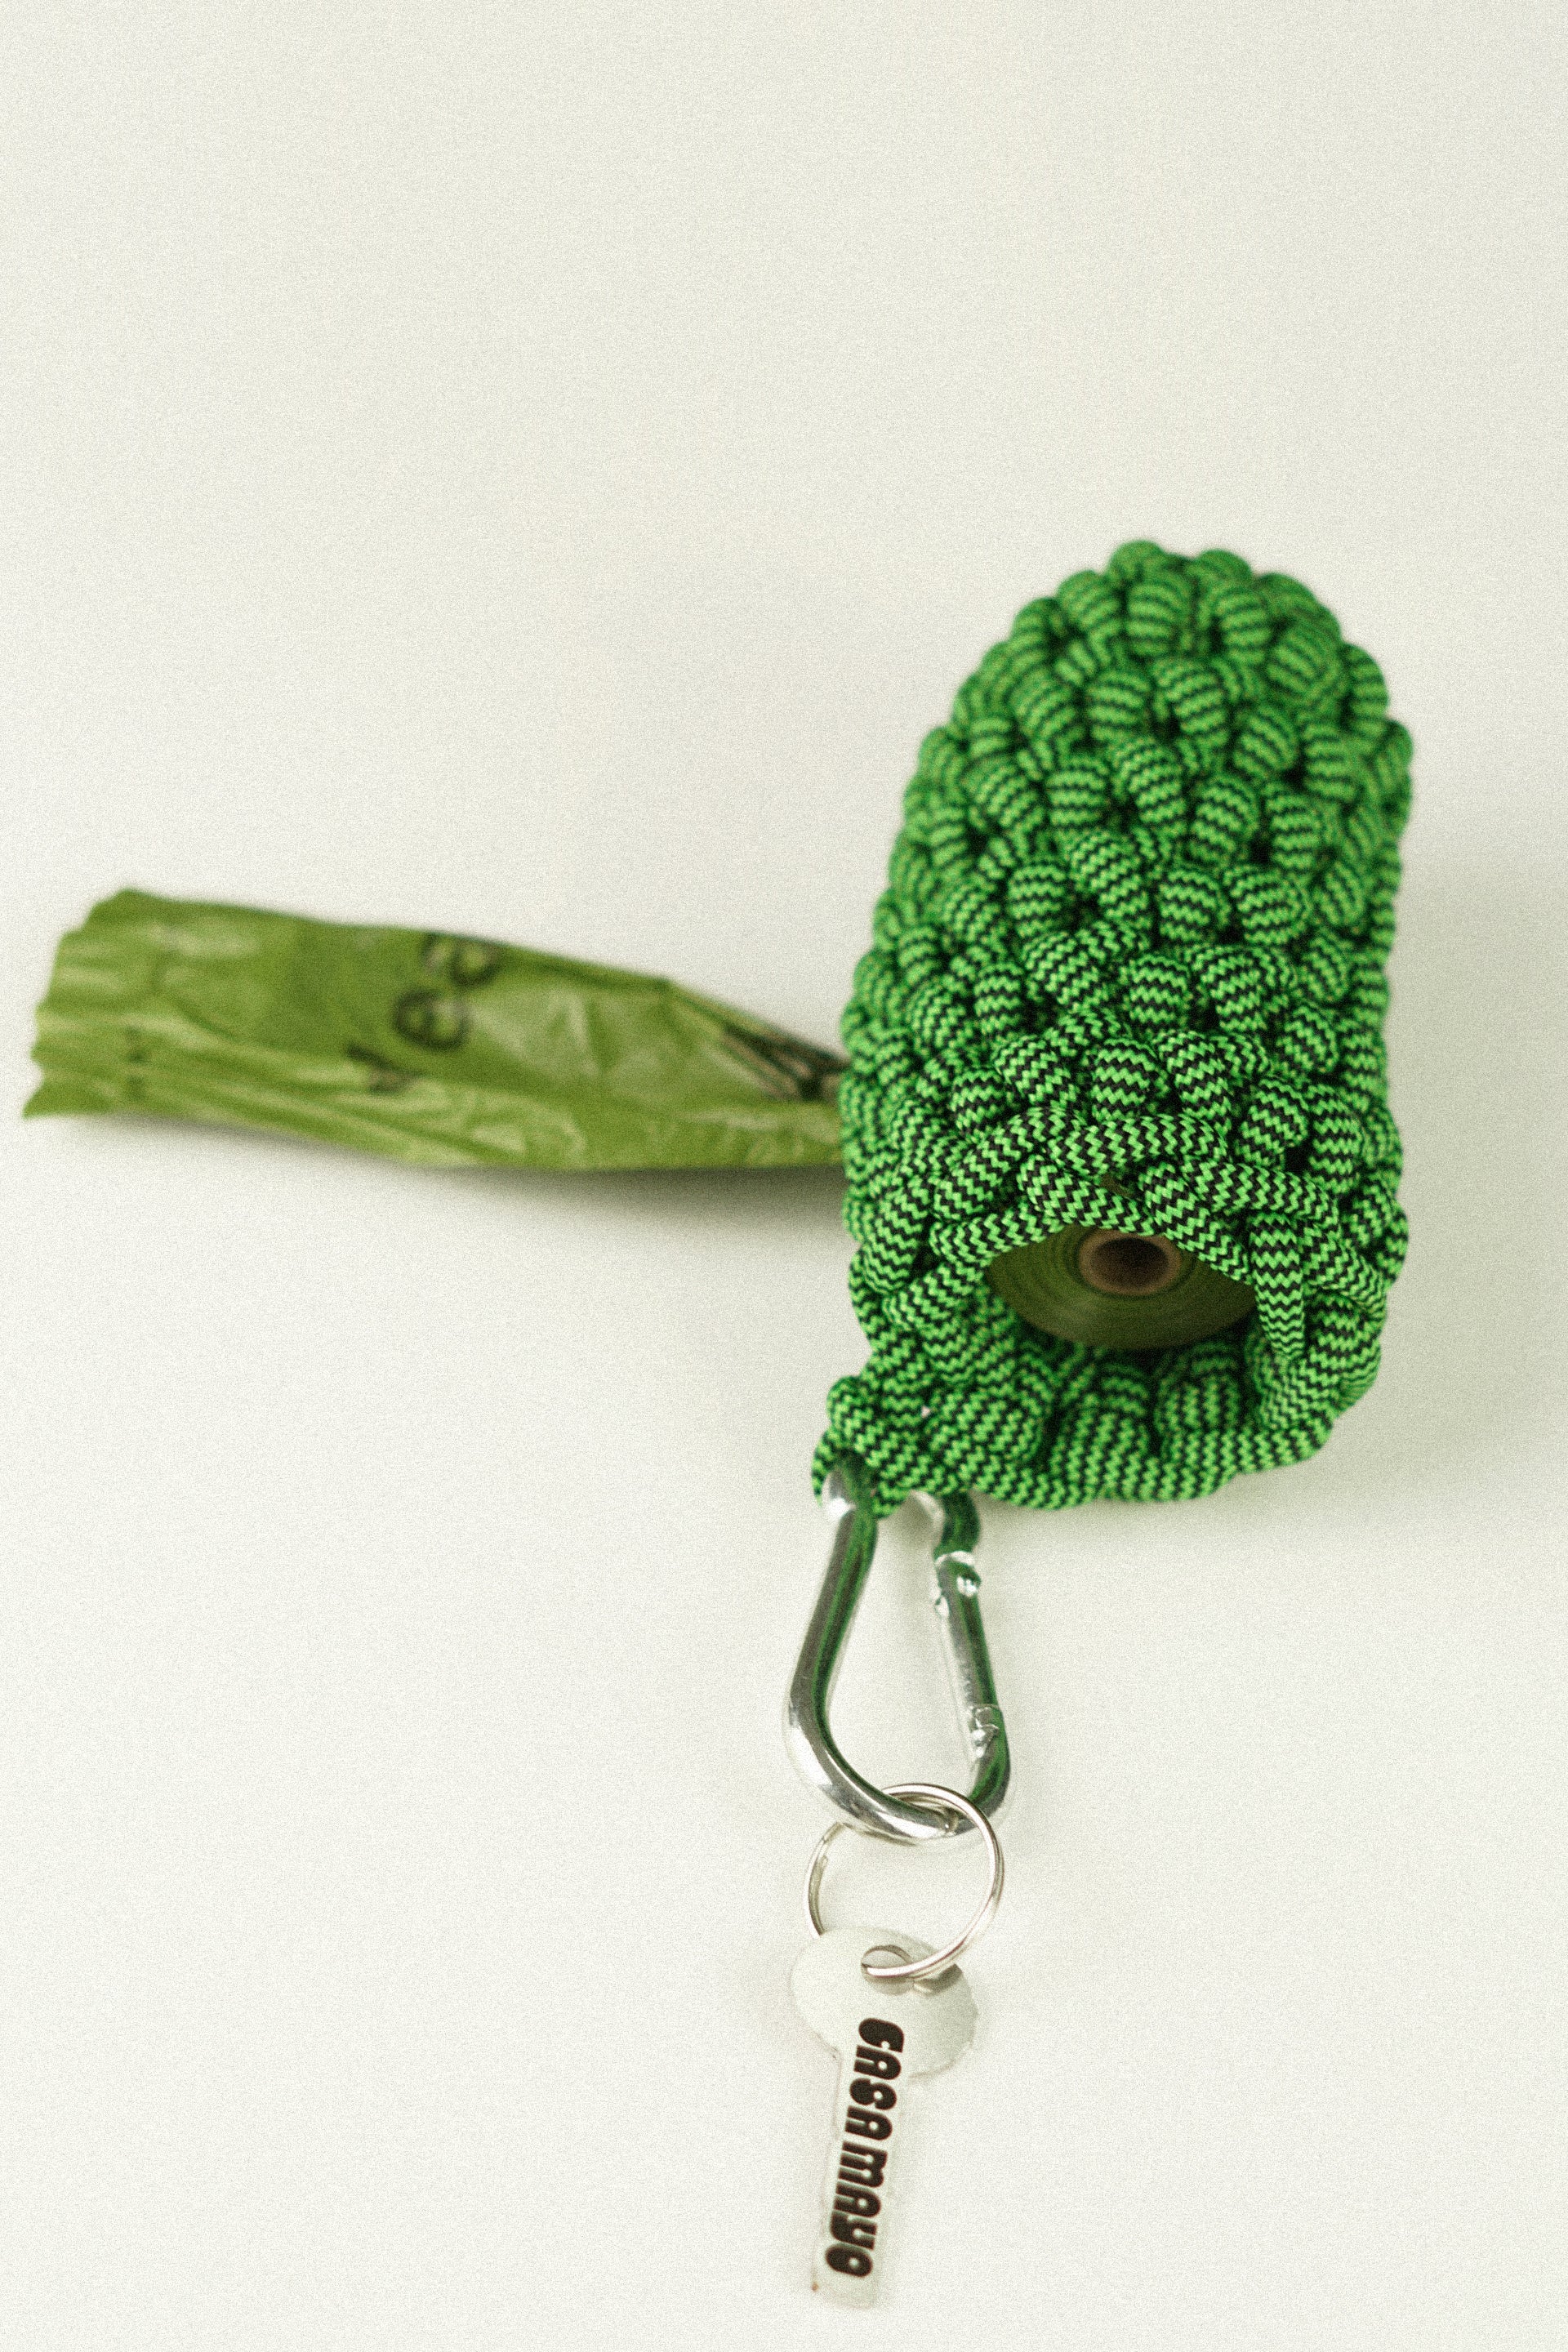 Green pet bag holder made of paracord rope